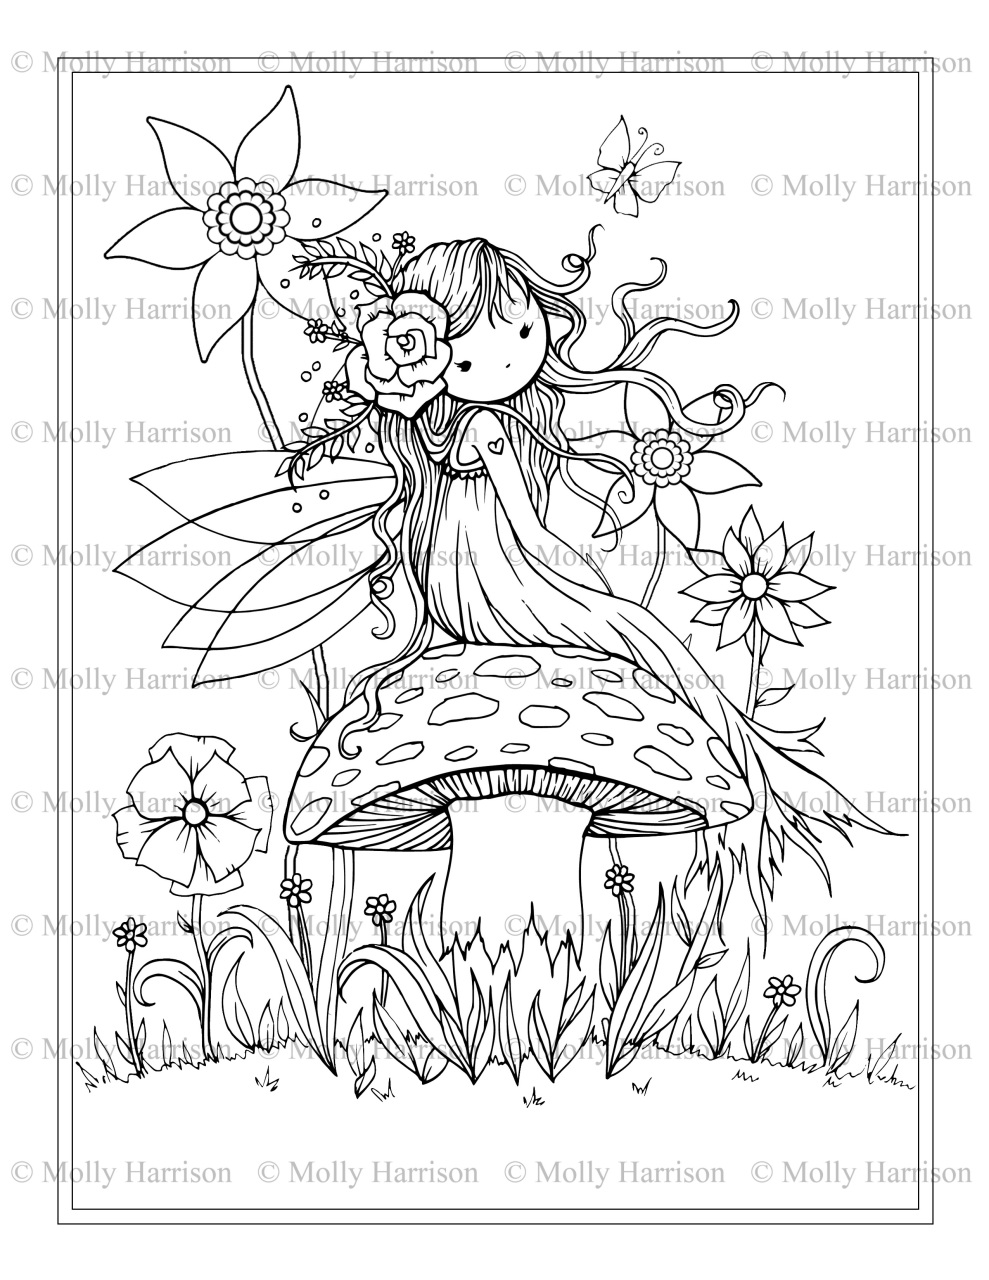 Whimsical World Coloring Books and Pages - The Fairy Art ...